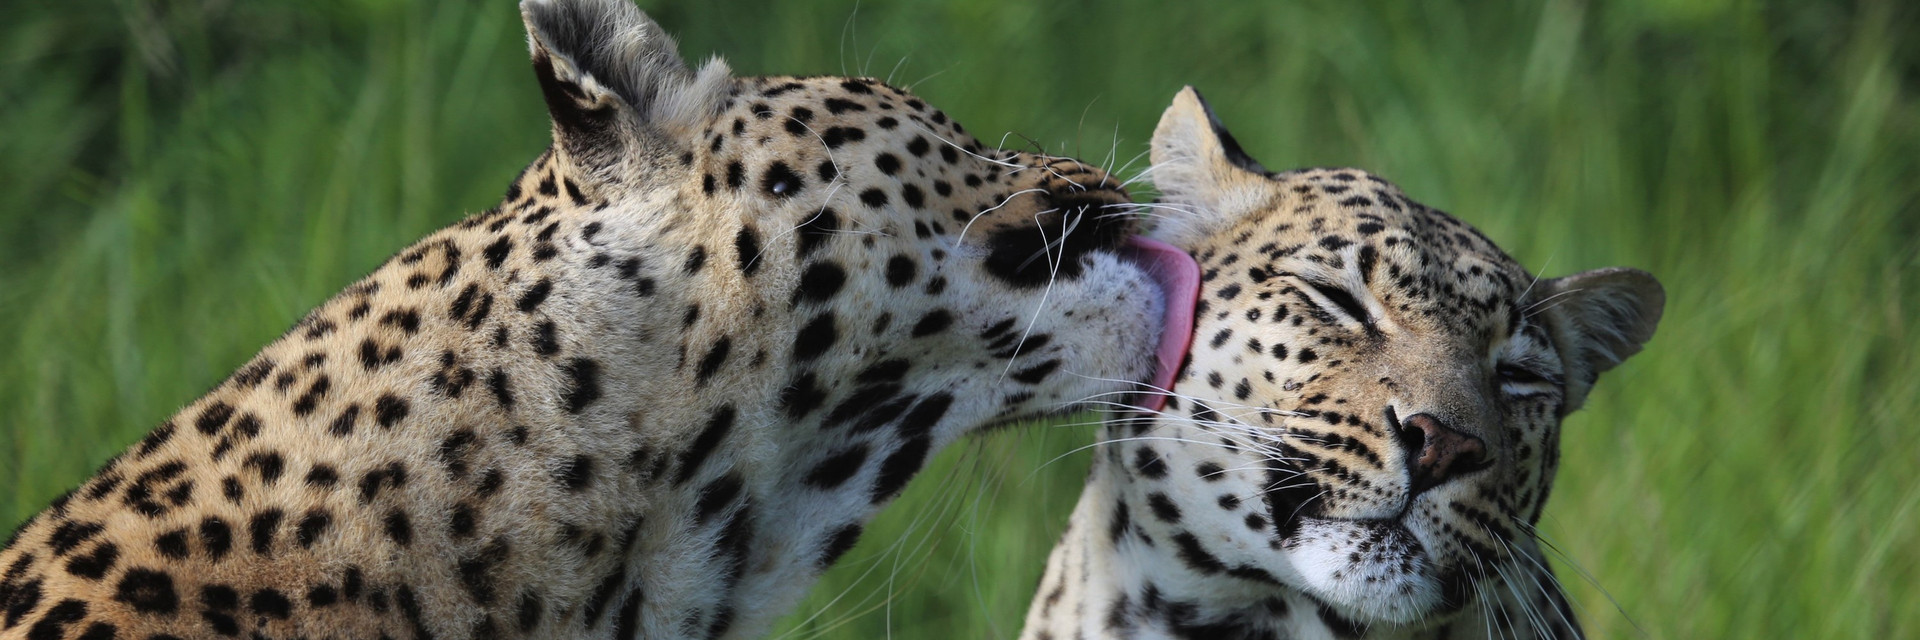 One leopard licking another